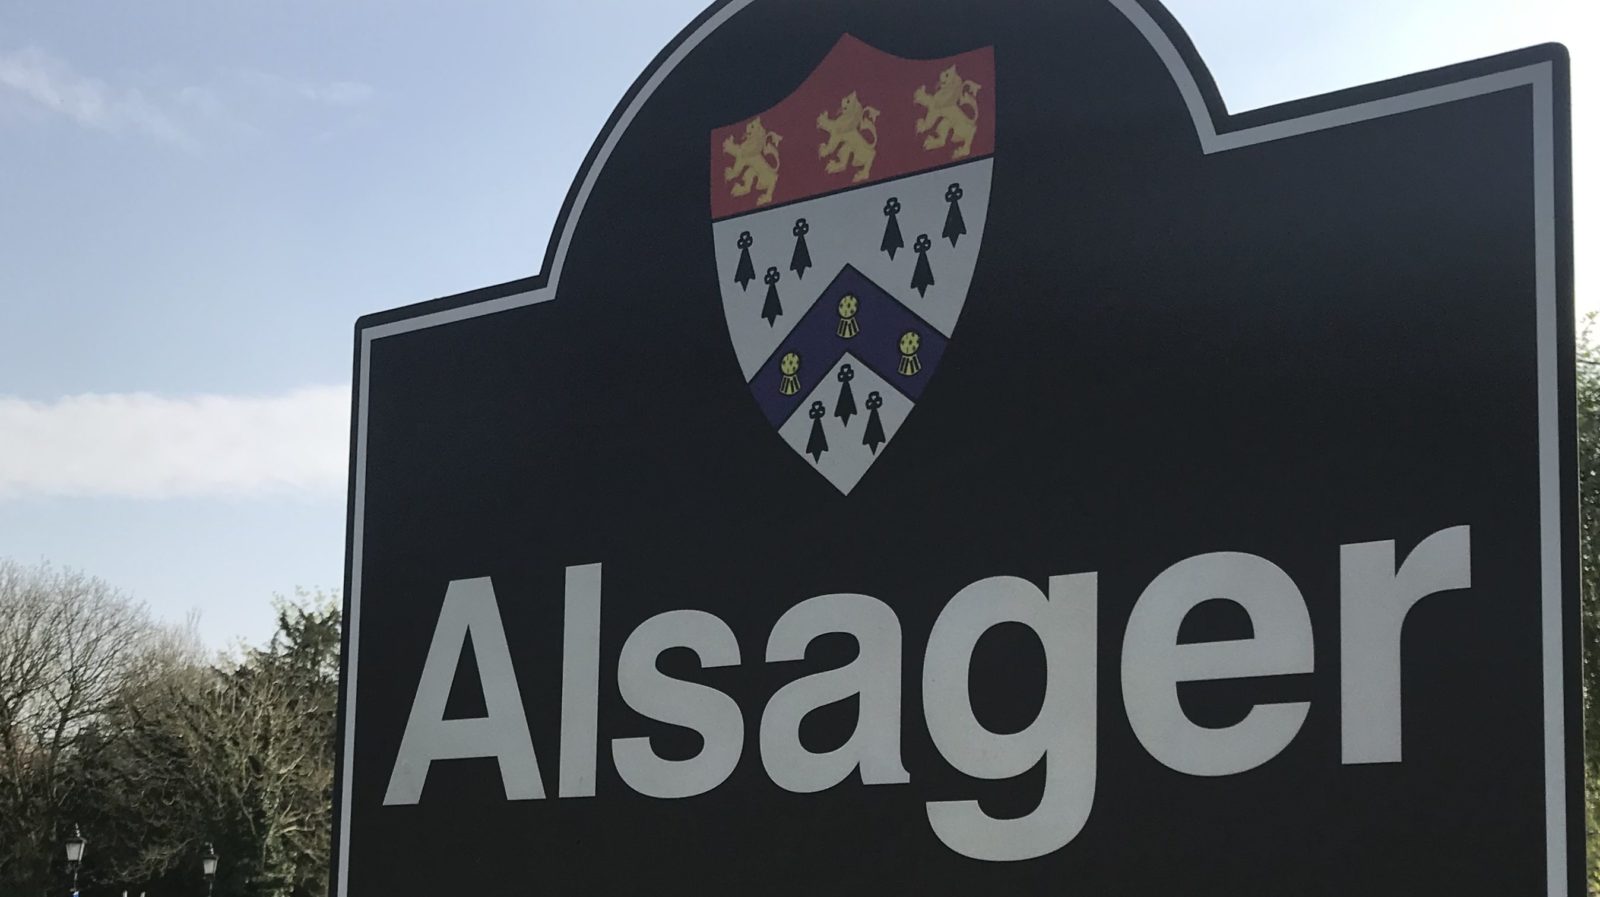 Alsager welcome sign